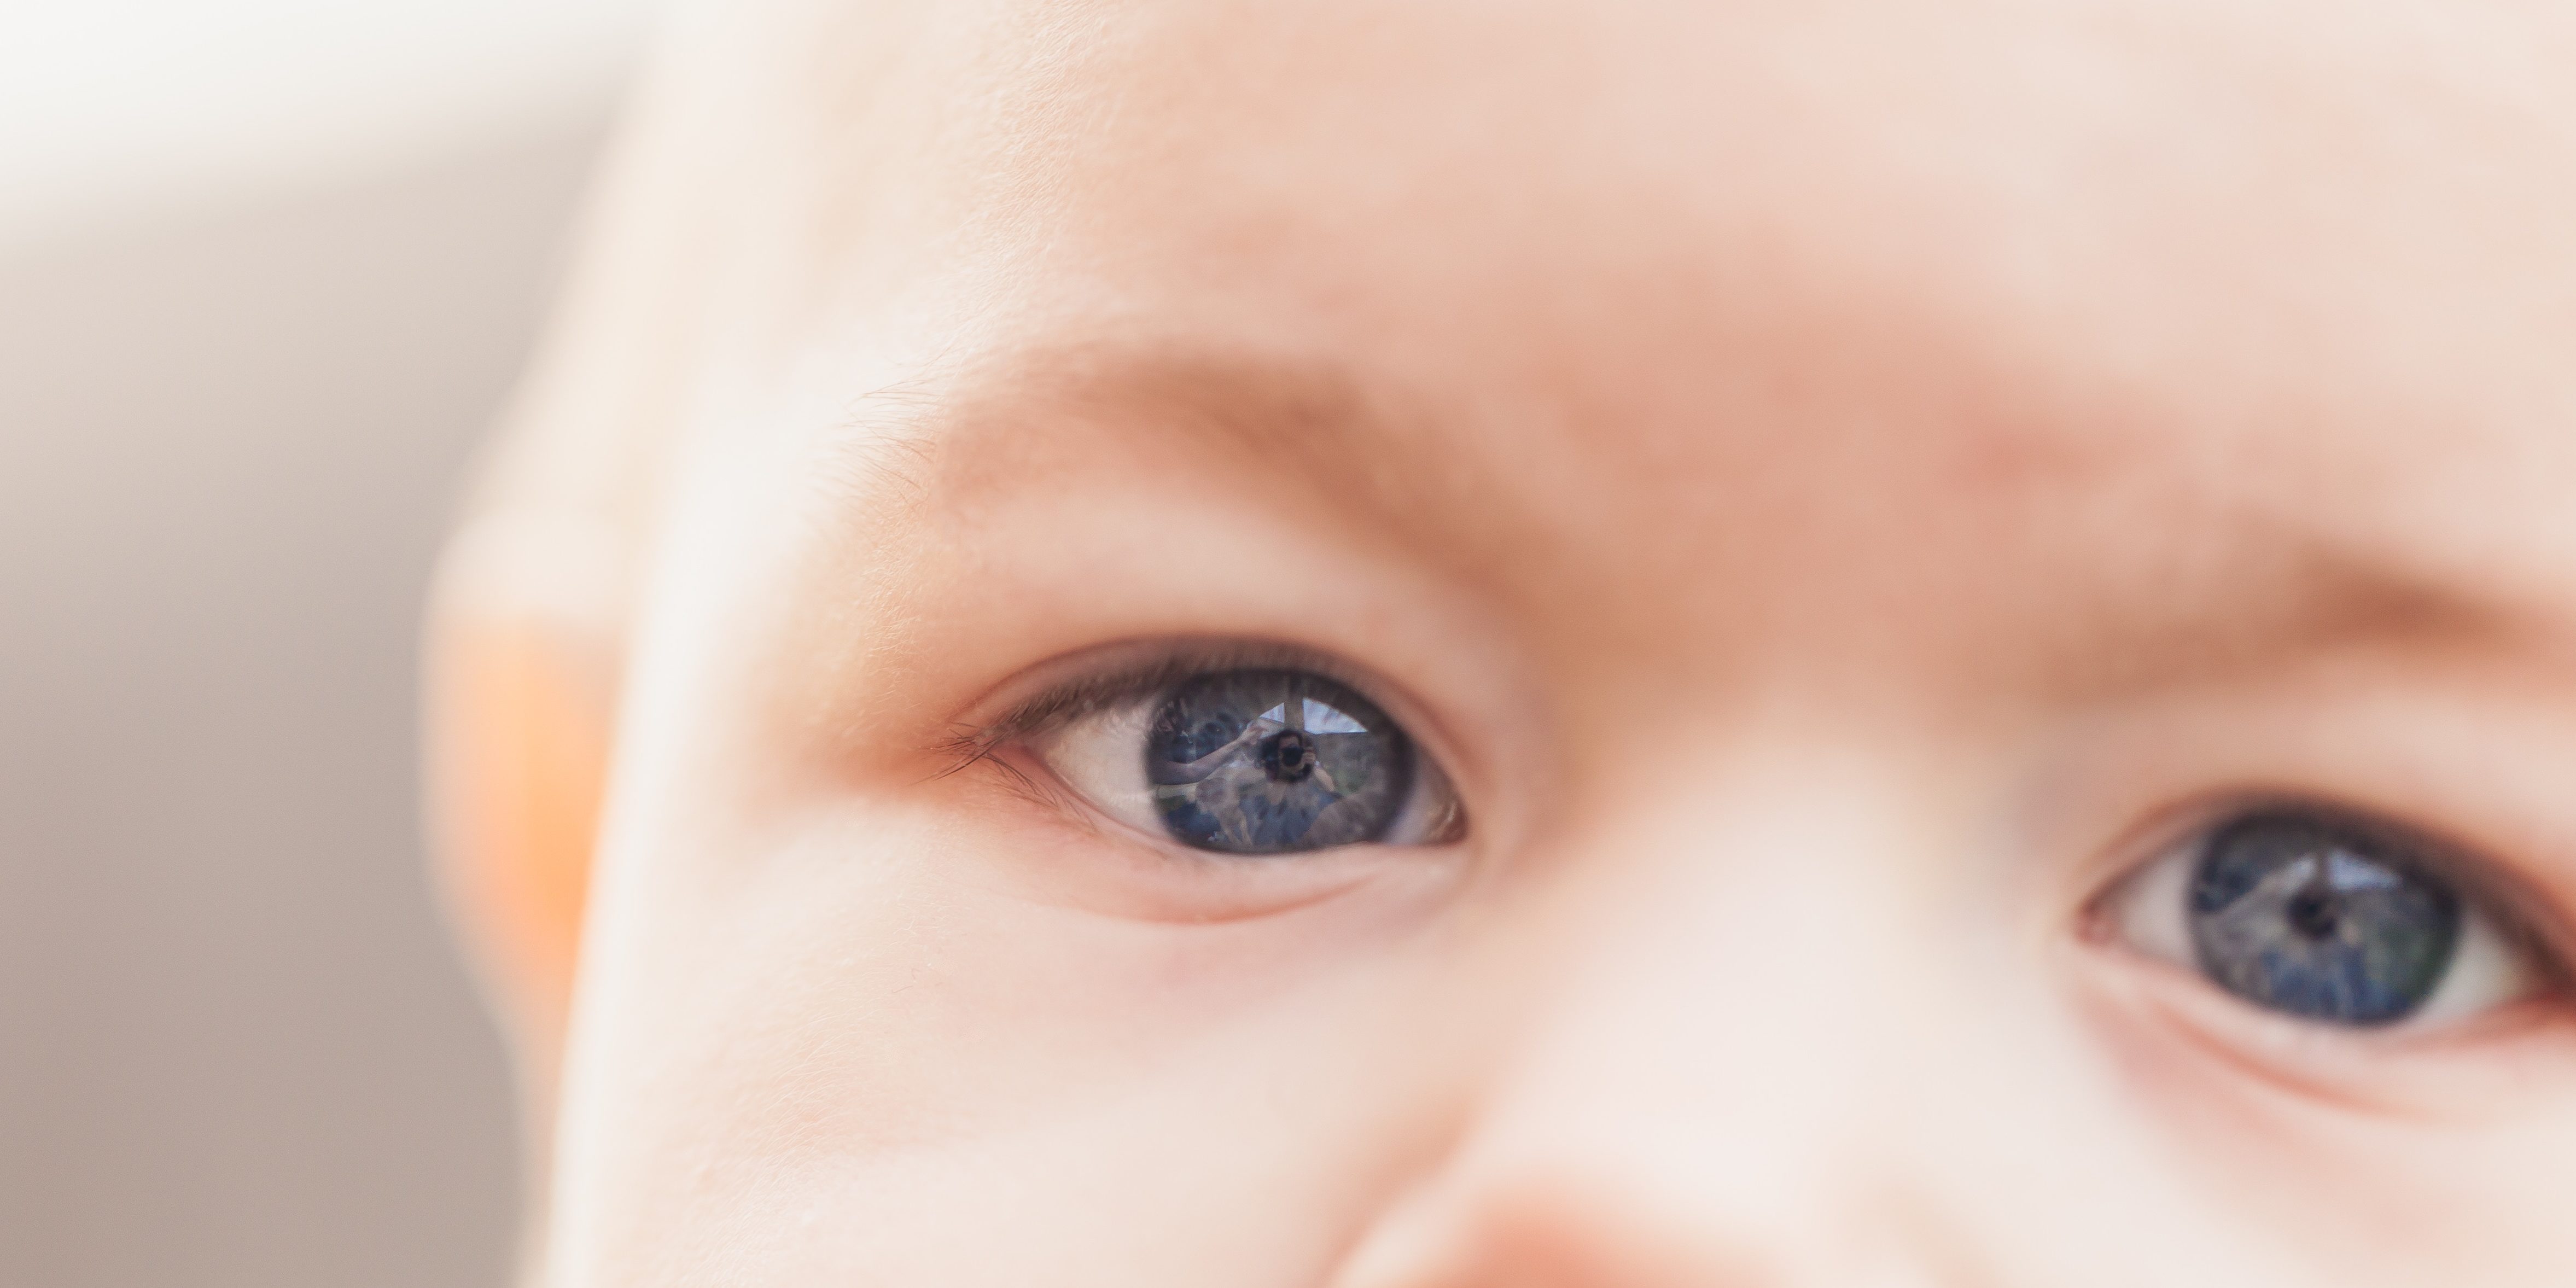 What is a rare eye condition in children?